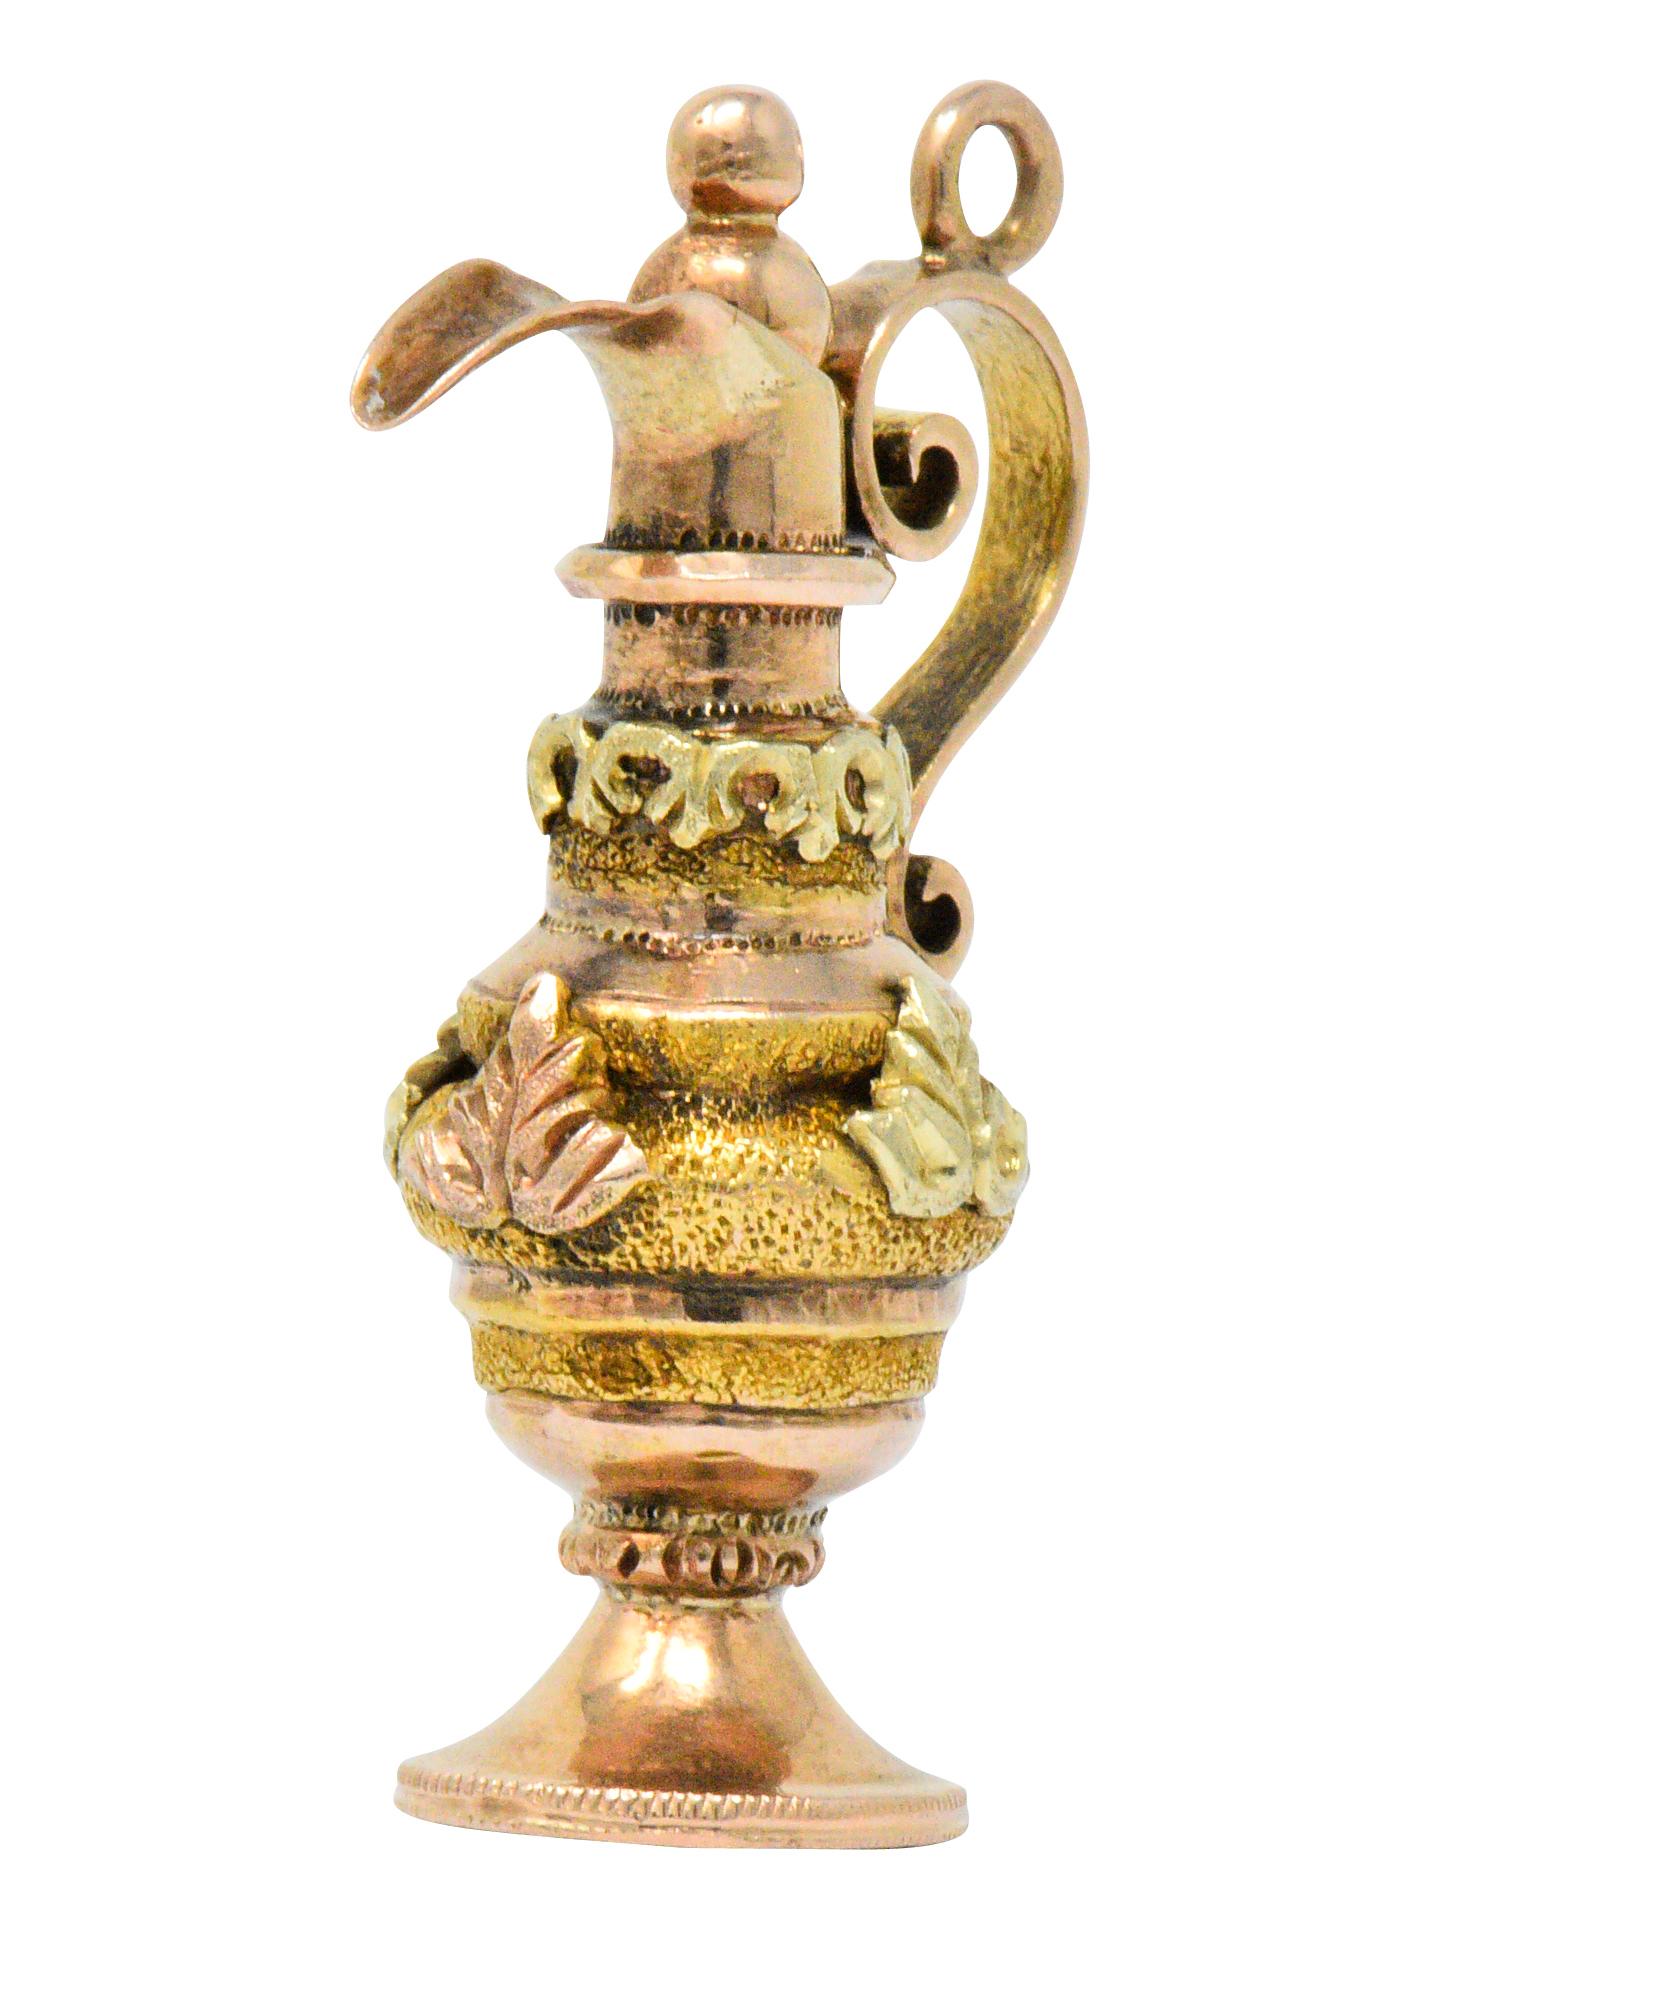 Designed as a highly decorative ewer

With scrolling handle, spout, lid and base

Applied rose and green gold leaves and textured yellow gold on a base of rose gold

Partial maker's mark

Measuring: Approx. 1 1/4 x 3/4 (widest)

Total Weight: 4.4